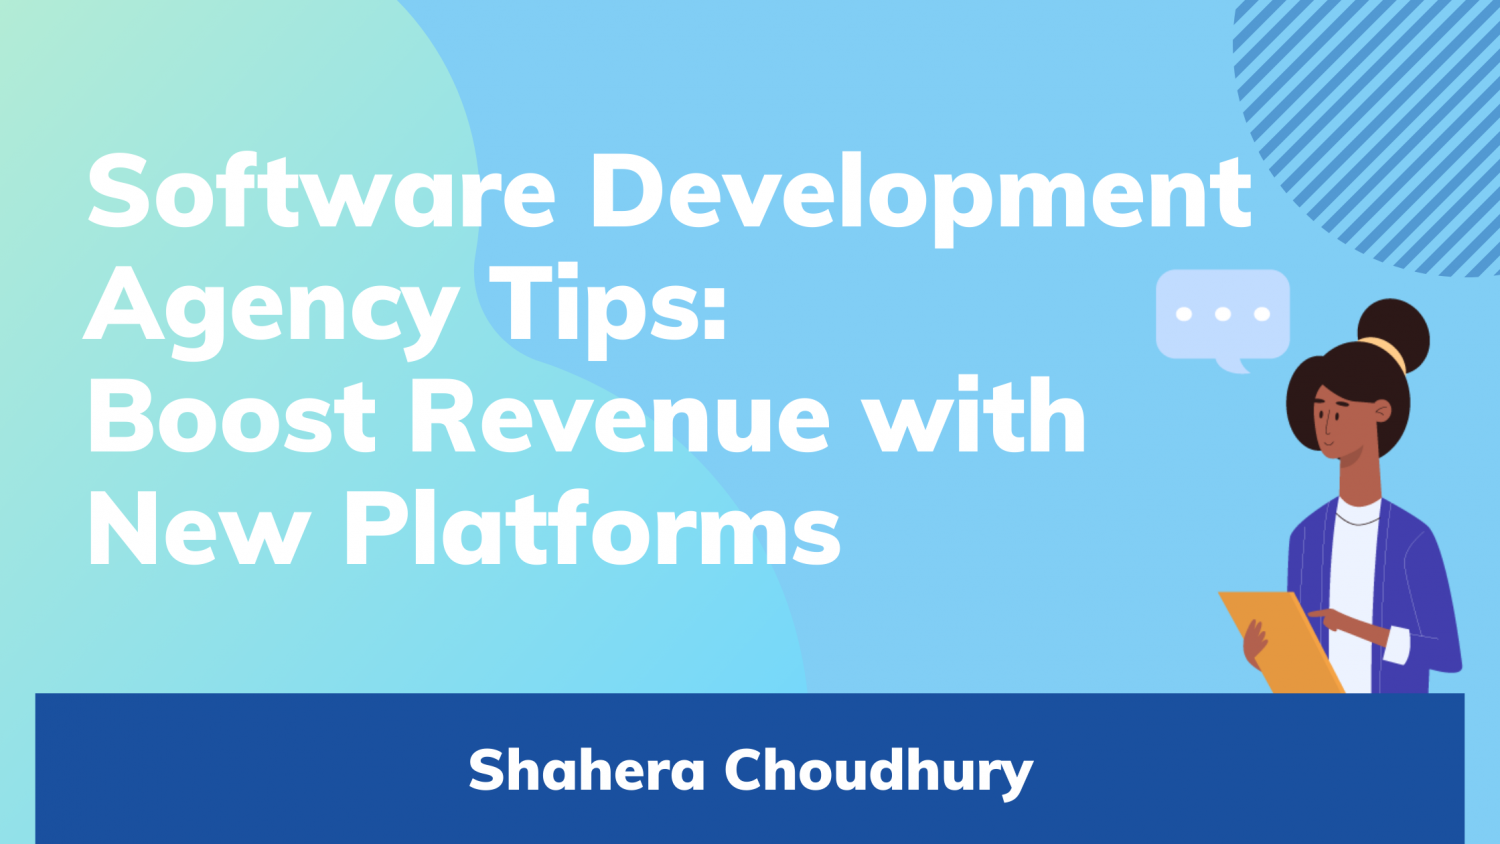 Software Development Agency Tips: Boost Revenue with New Platforms